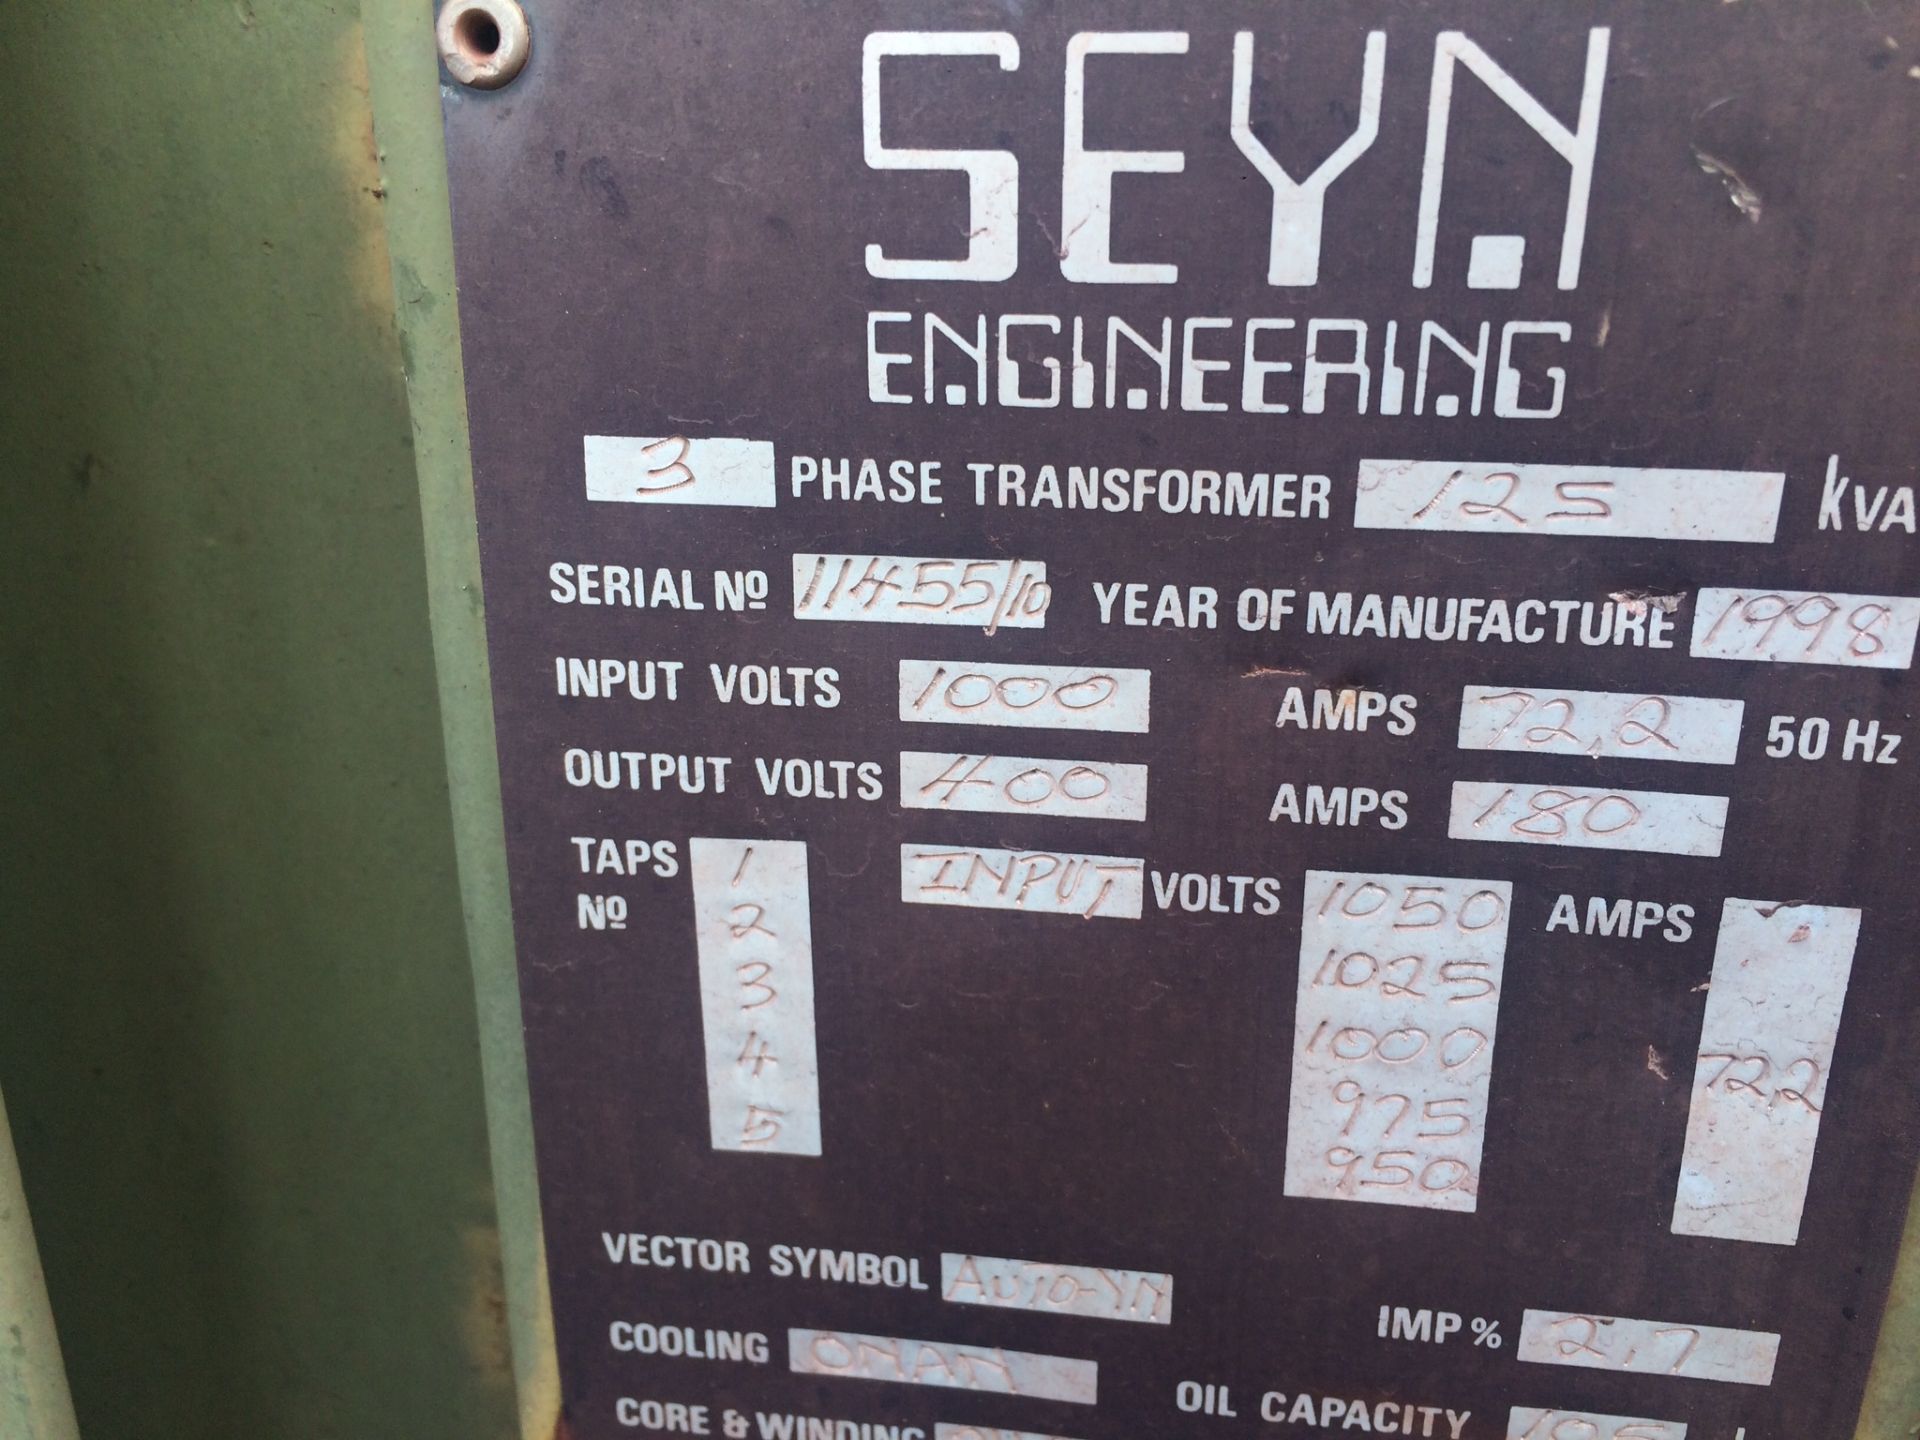 2 X SEYN ENGINEERING TRANSFORMERS(3 PHASE) - TO BE SOLD PER PIECE, ONE BUYER TO TAKE ALL - Image 3 of 3